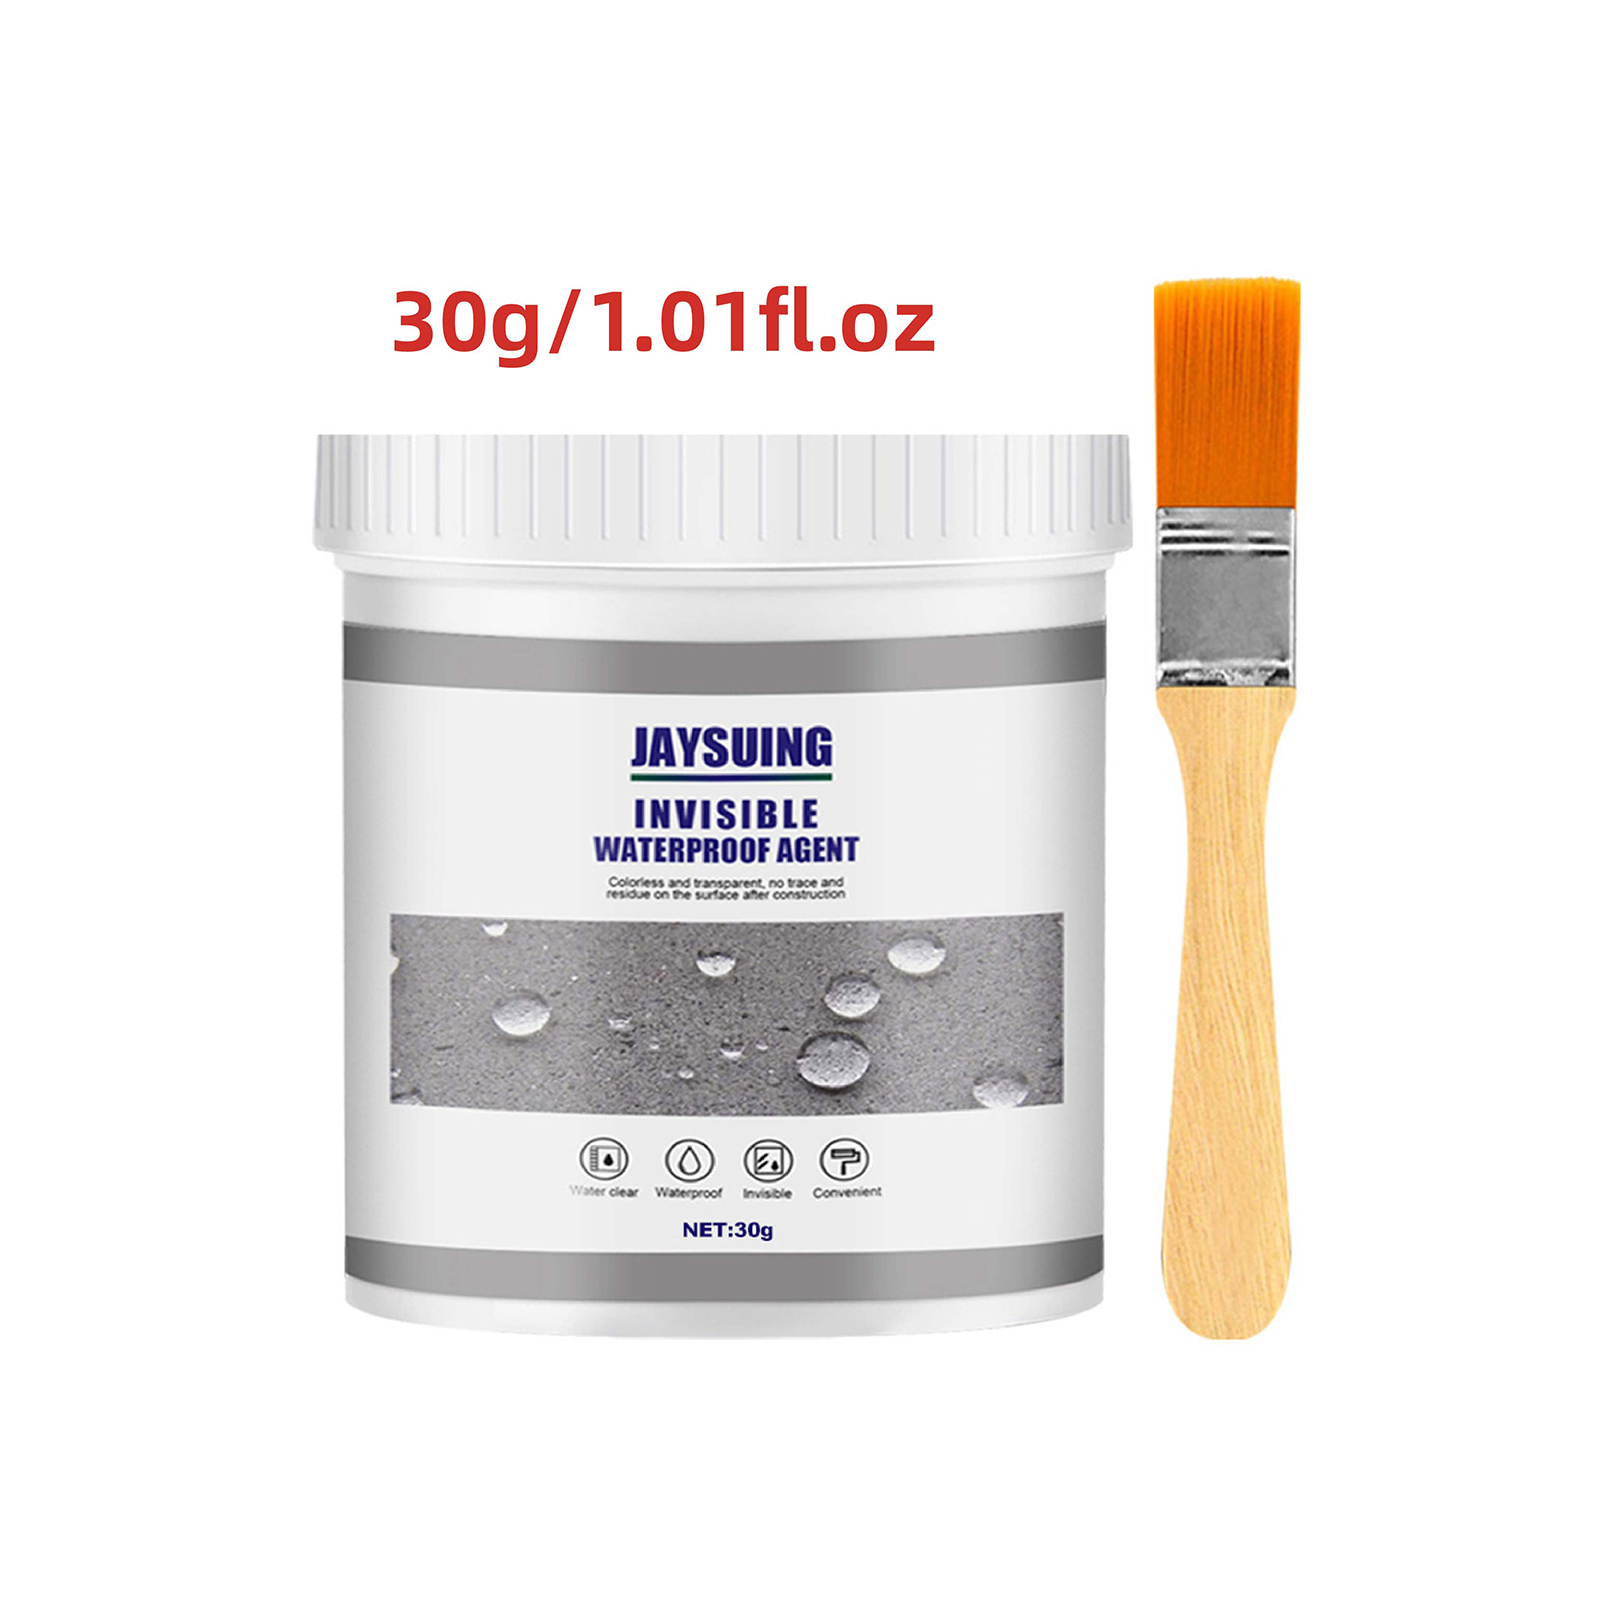 300g(2pc) Invisible Waterproof Agent,Transparent Repairing Leak Waterproof  Adhesive,Waterproof Insulating Sealant,Super Strong Bonding Sealant  Invisible Waterproof Anti-Leakage Agent 